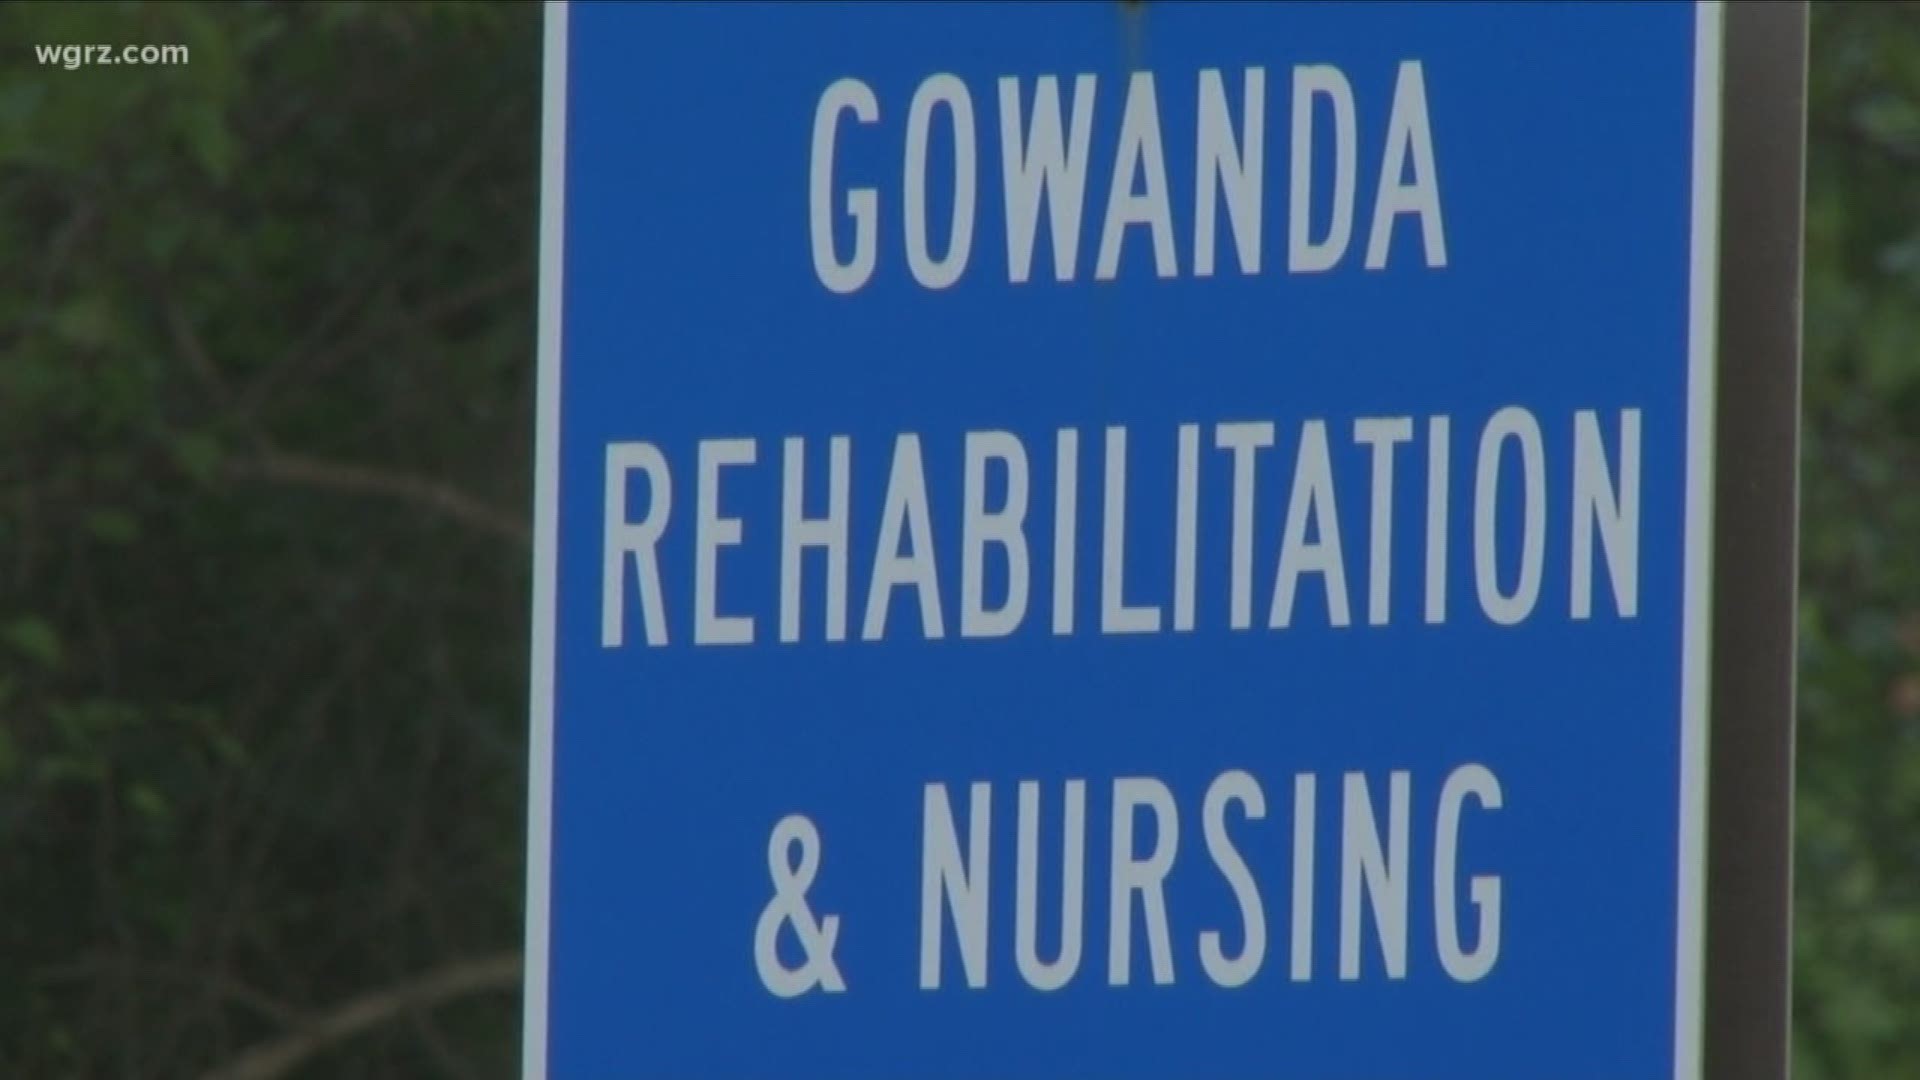 The state Department of Health is investigating some sort of incident at a nursing home in Gowanda.